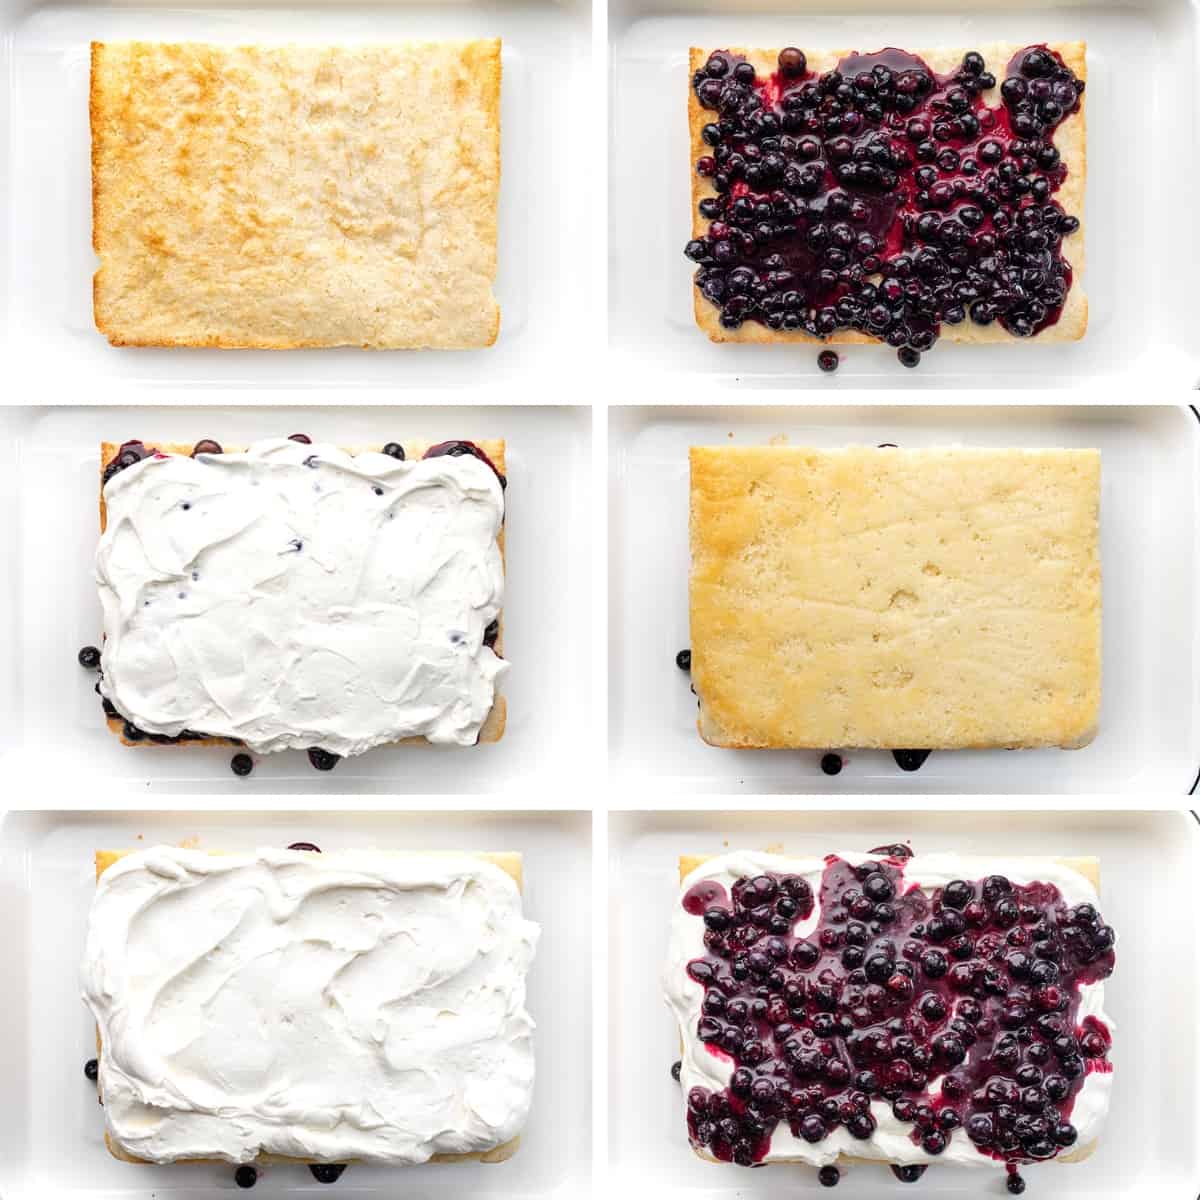 Steps for Making Sheet Pan Blueberry Shortcake Cake by Building Layers with White Cake, Whipped Cream, and Blueberry Filling.